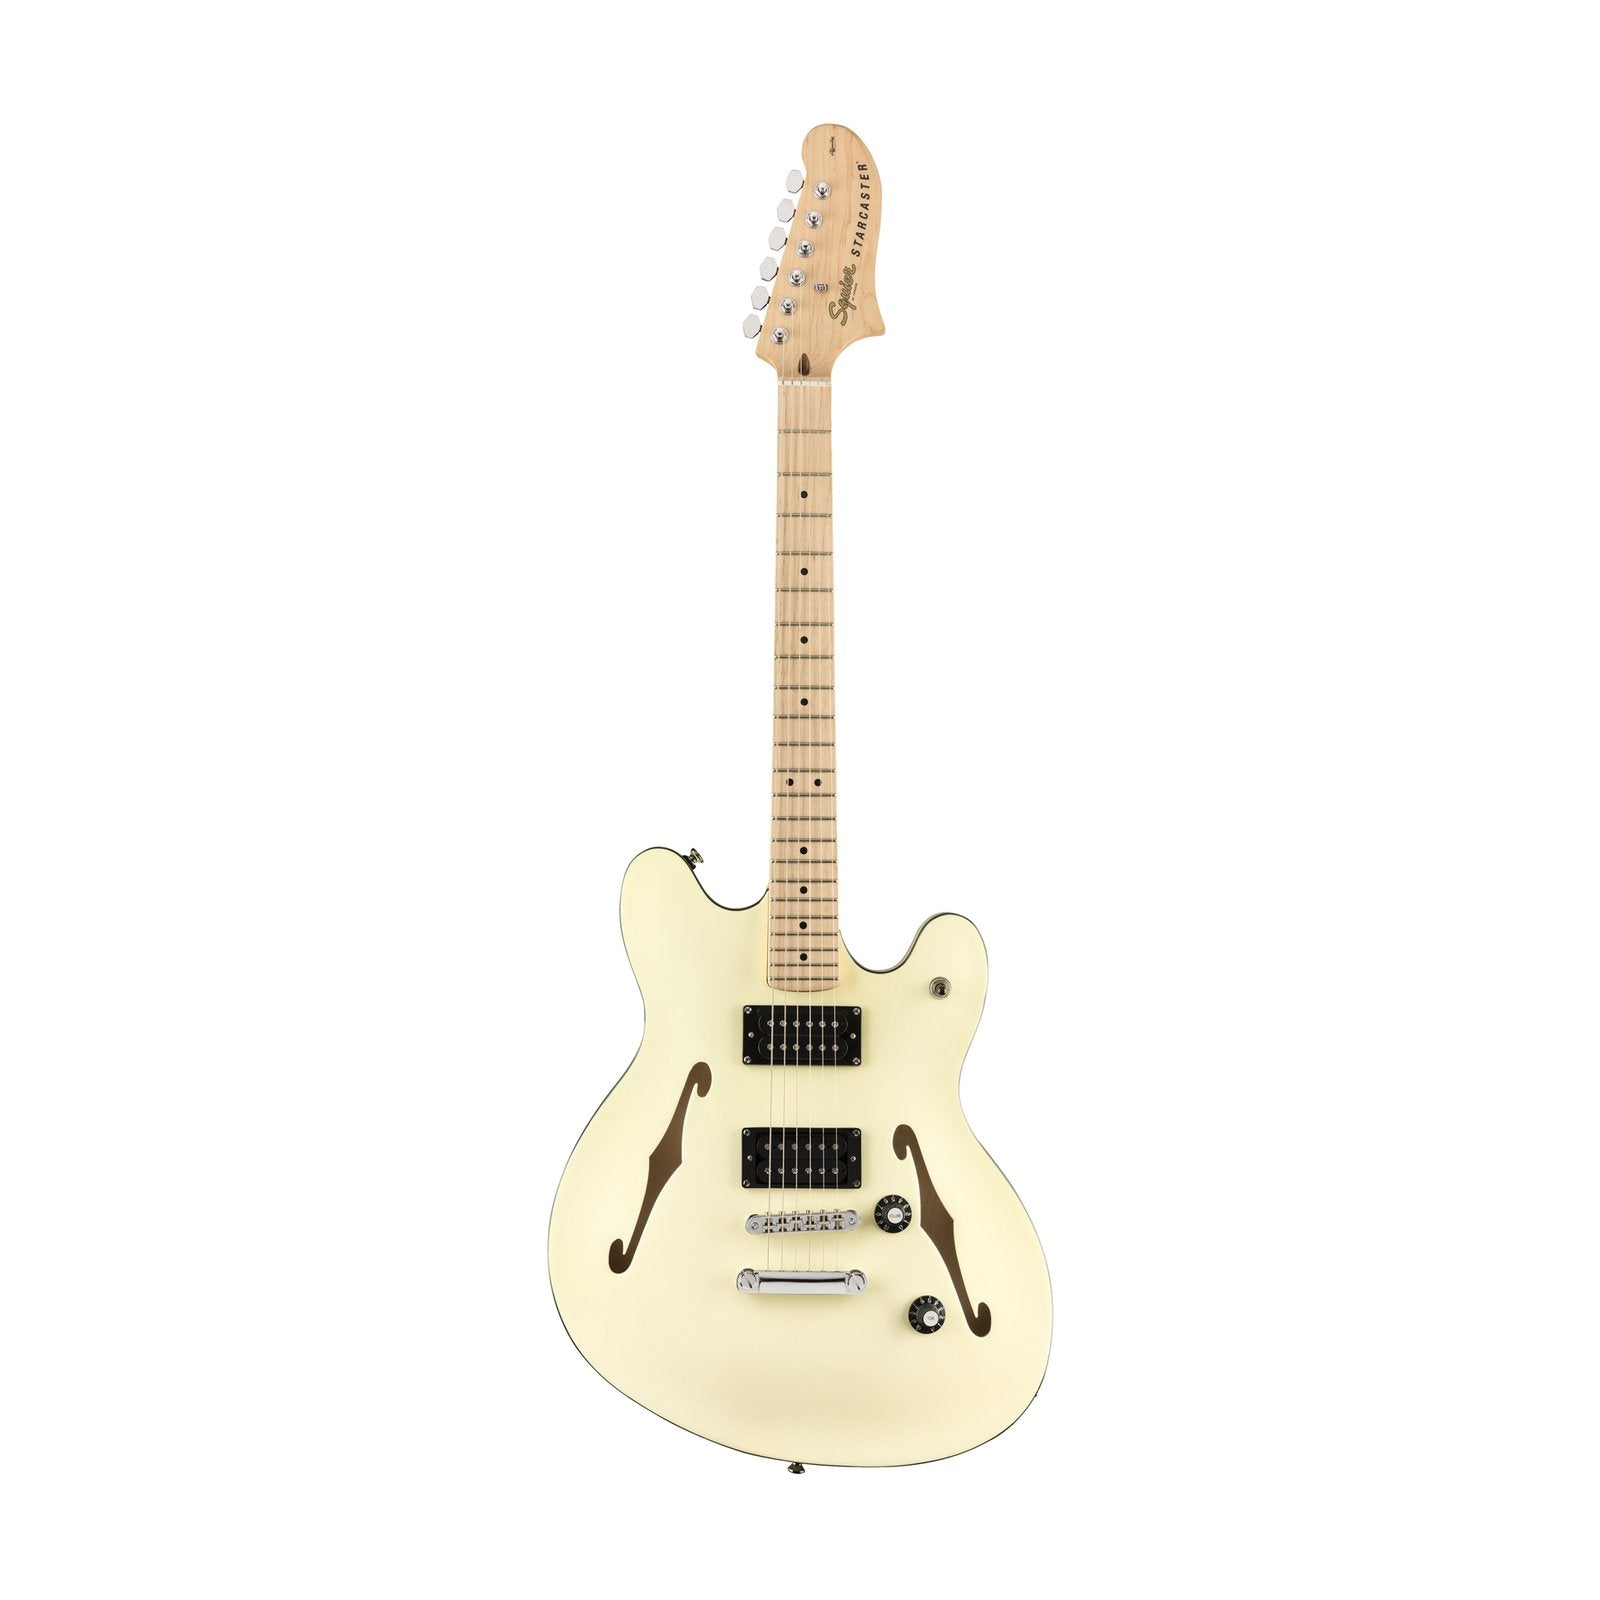 Squier Affinity Series Starcaster Electric Guitar, Maple FB, Olympic White, SQUIER BY FENDER, ELECTRIC GUITAR, squier-by-fender-electric-guitar-037-0590-505, ZOSO MUSIC SDN BHD